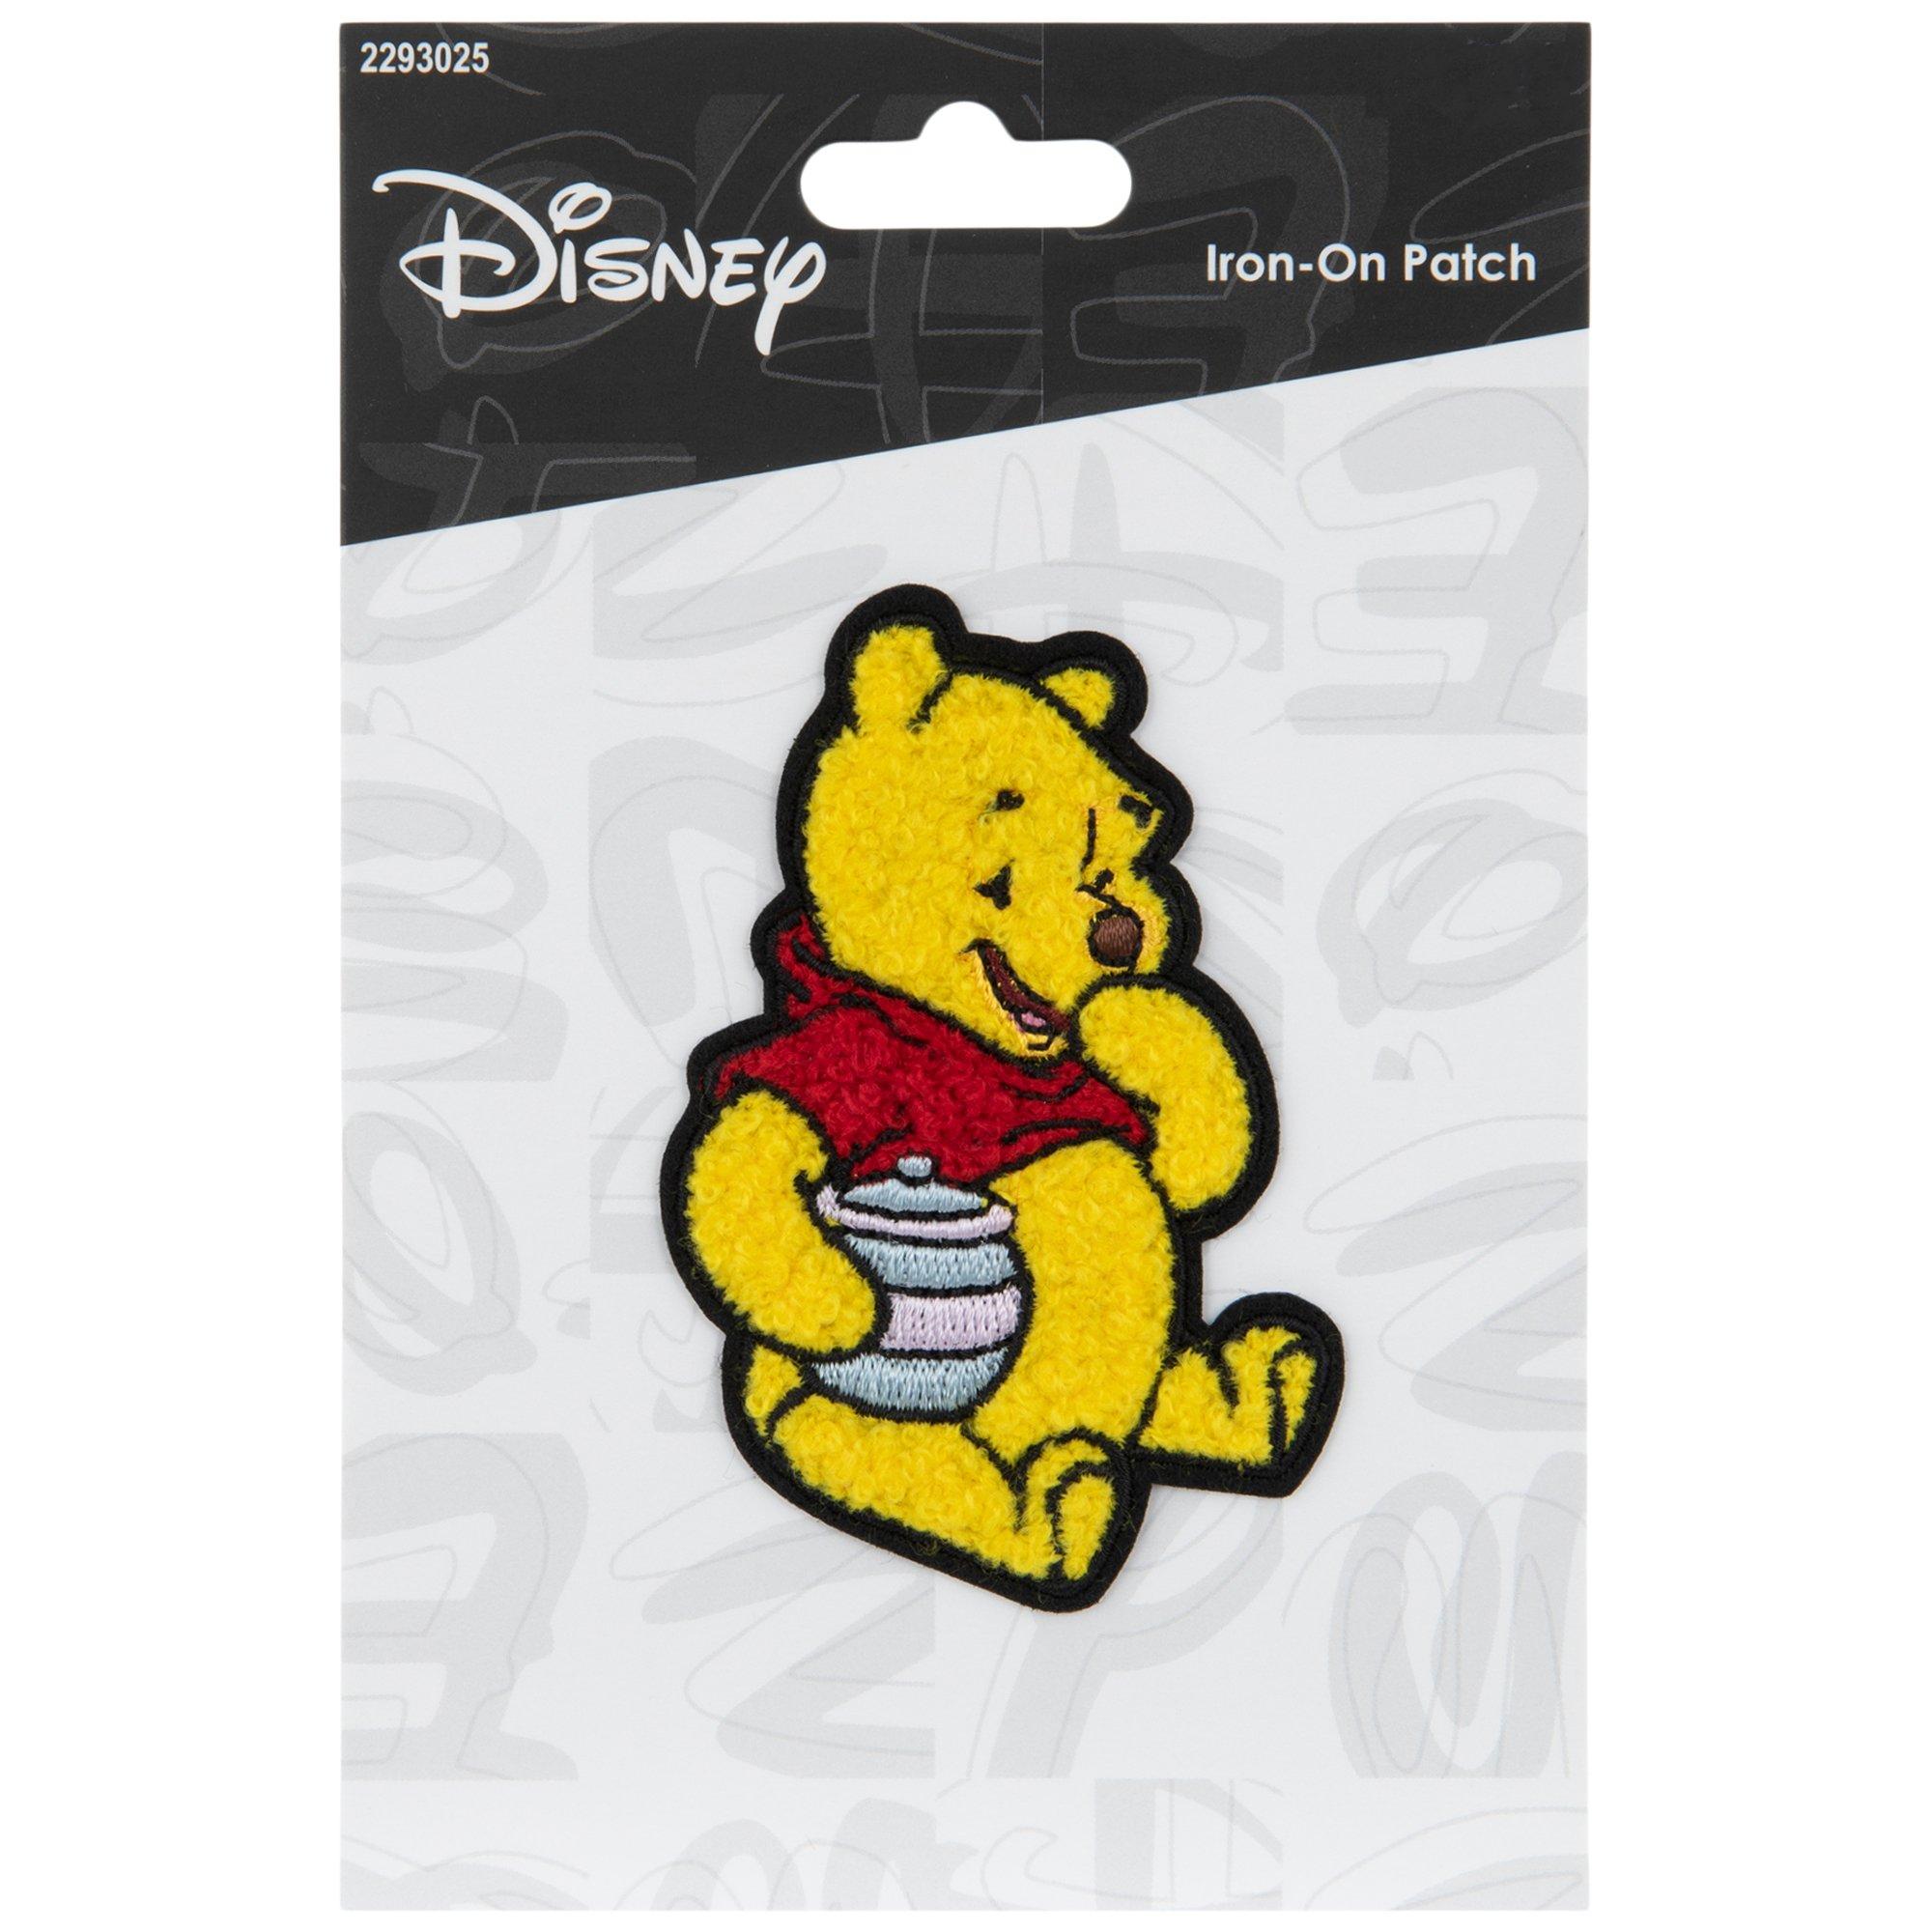 Pooh Collection Wrights Disney Iron-On Patch Appliques Of Winnie Pooh  Baseball